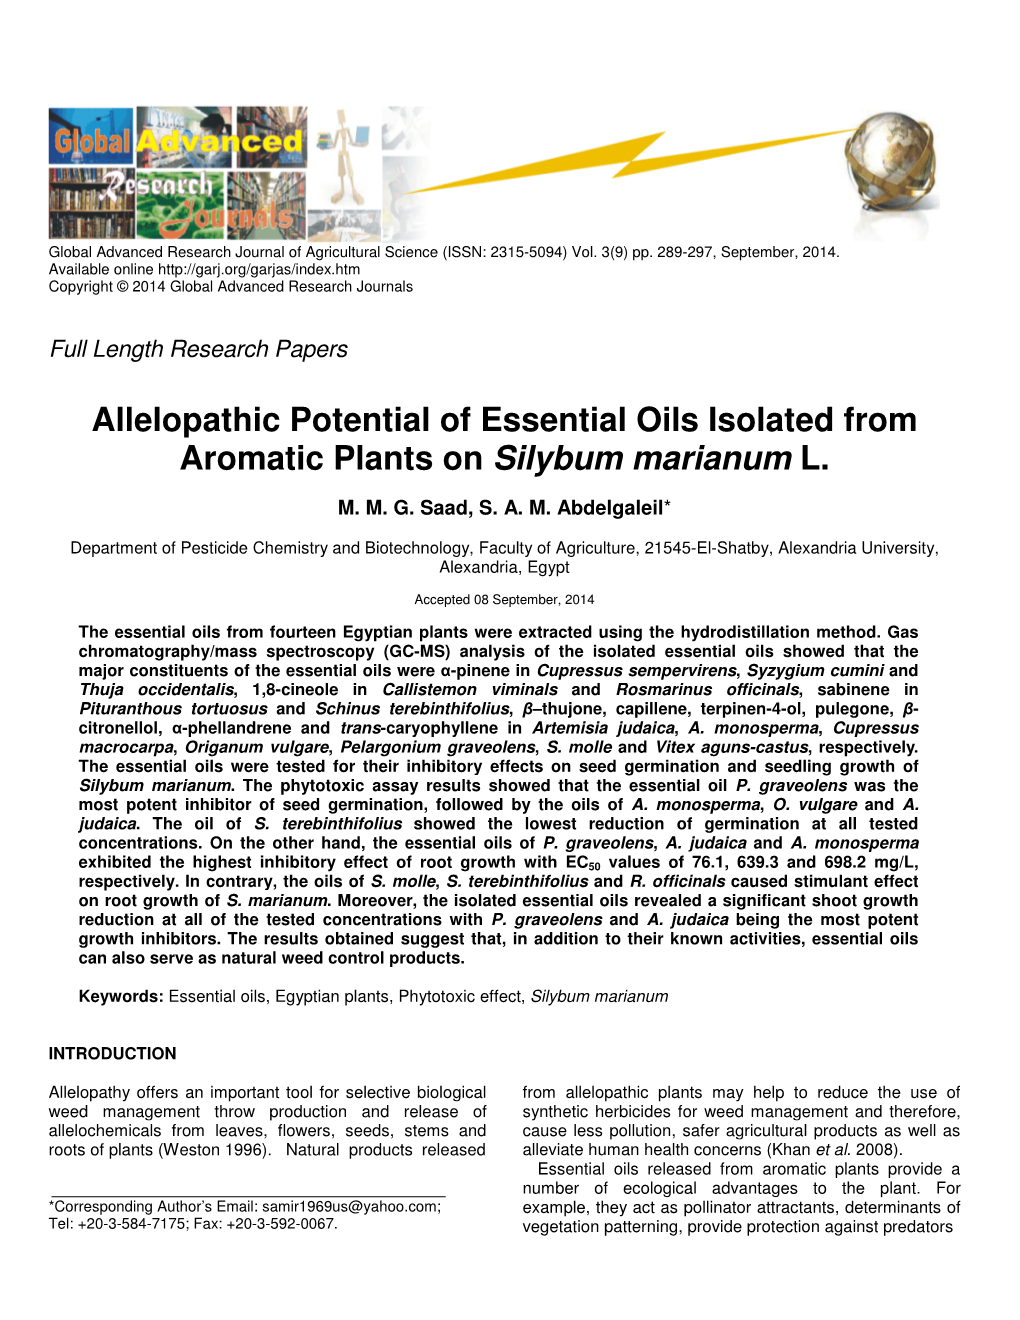 Allelopathic Potential of Essential Oils Isolated from Aromatic Plants on Silybum Marianum L